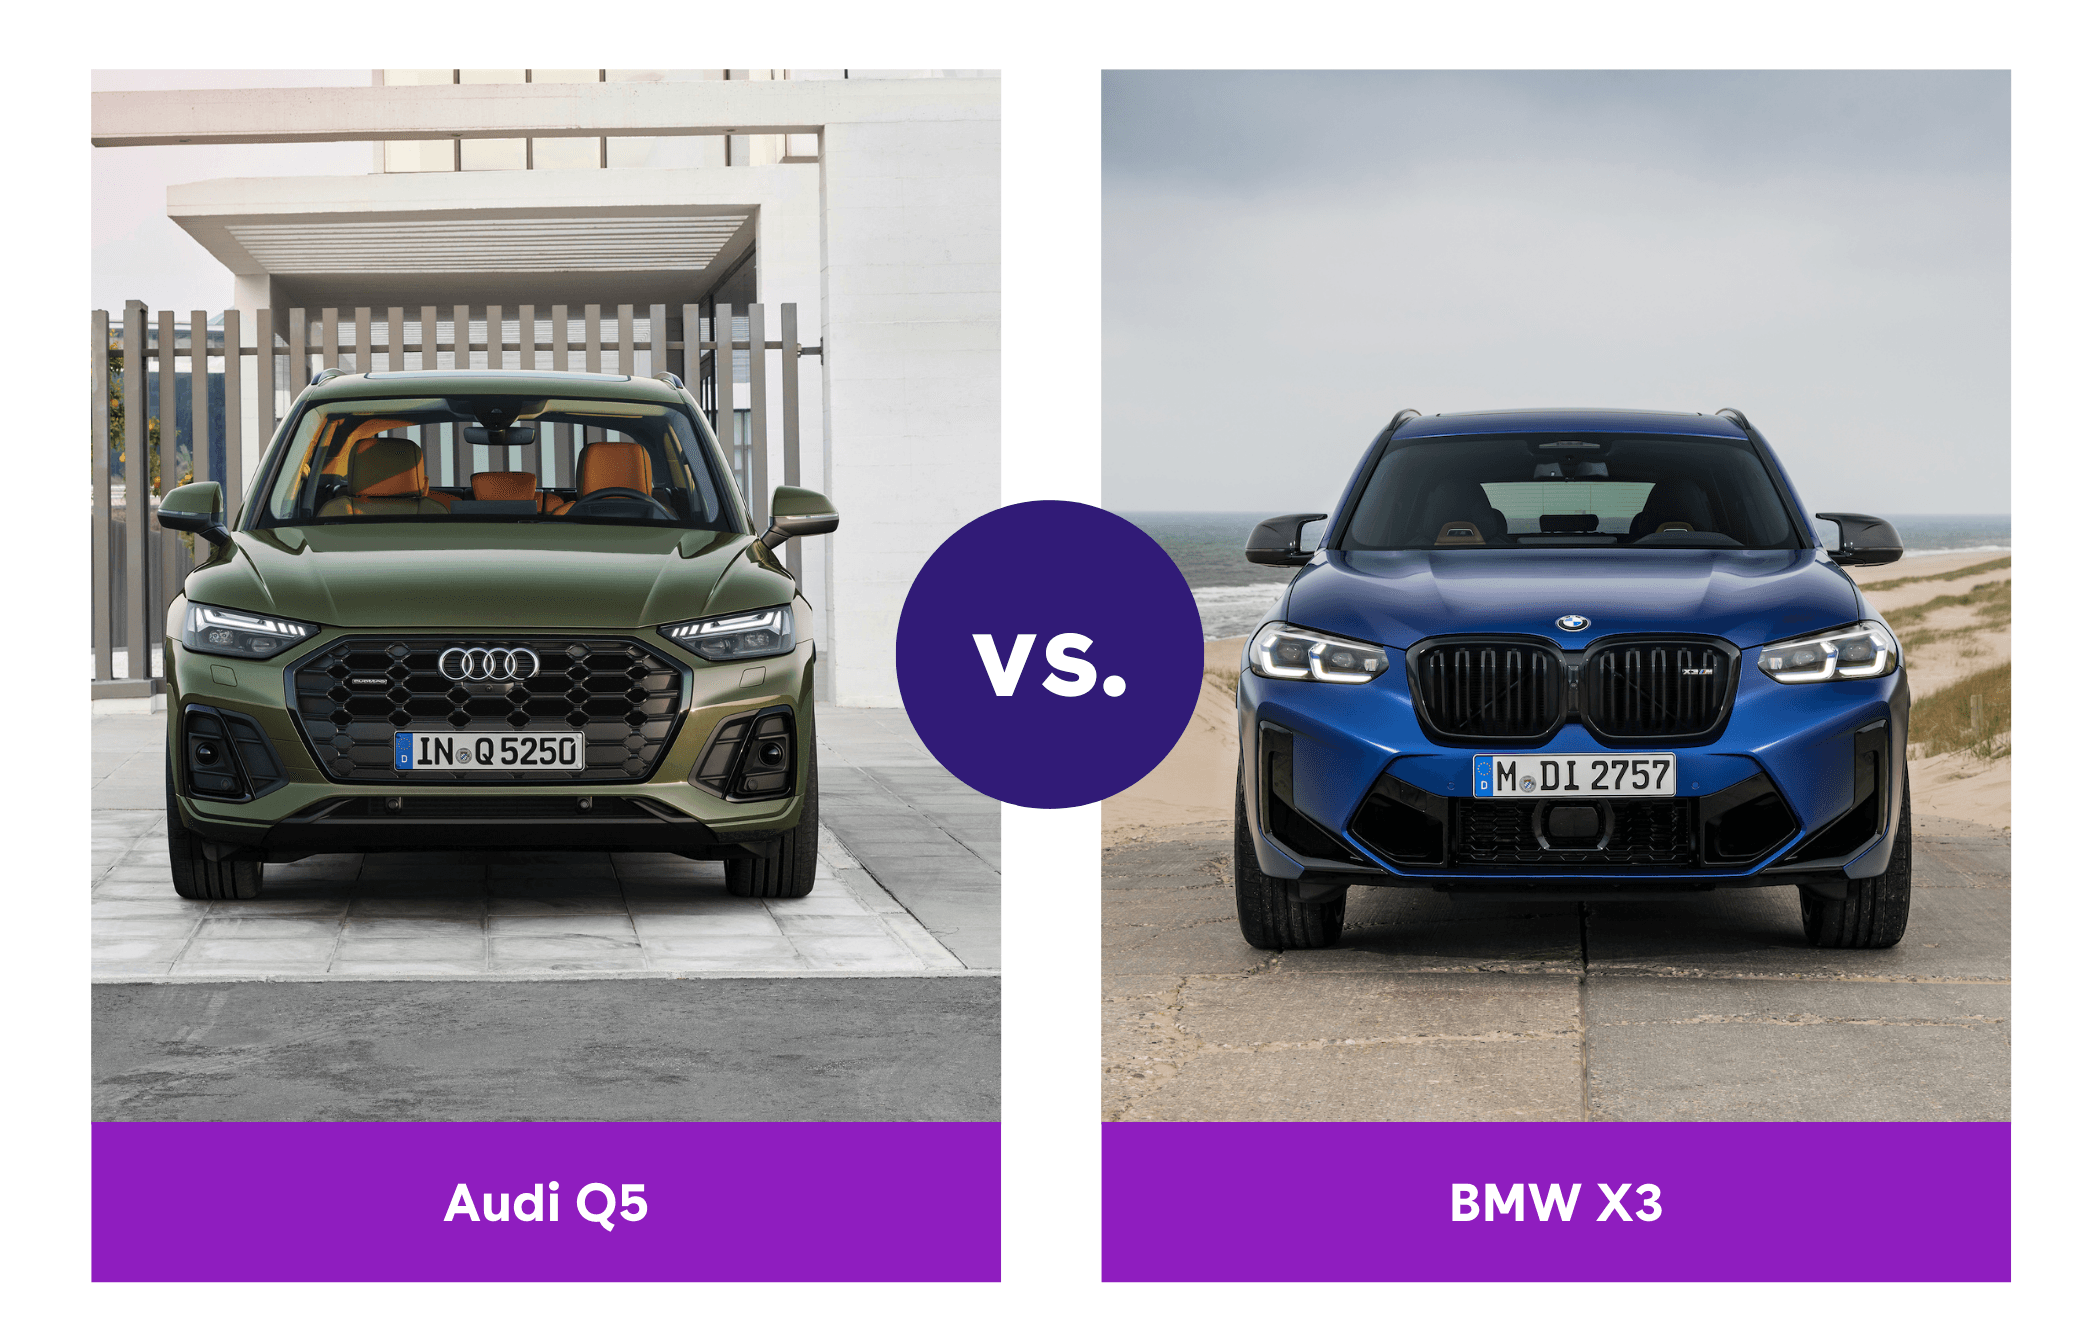 A comparison of the Audi Q5 and BMW X3 models